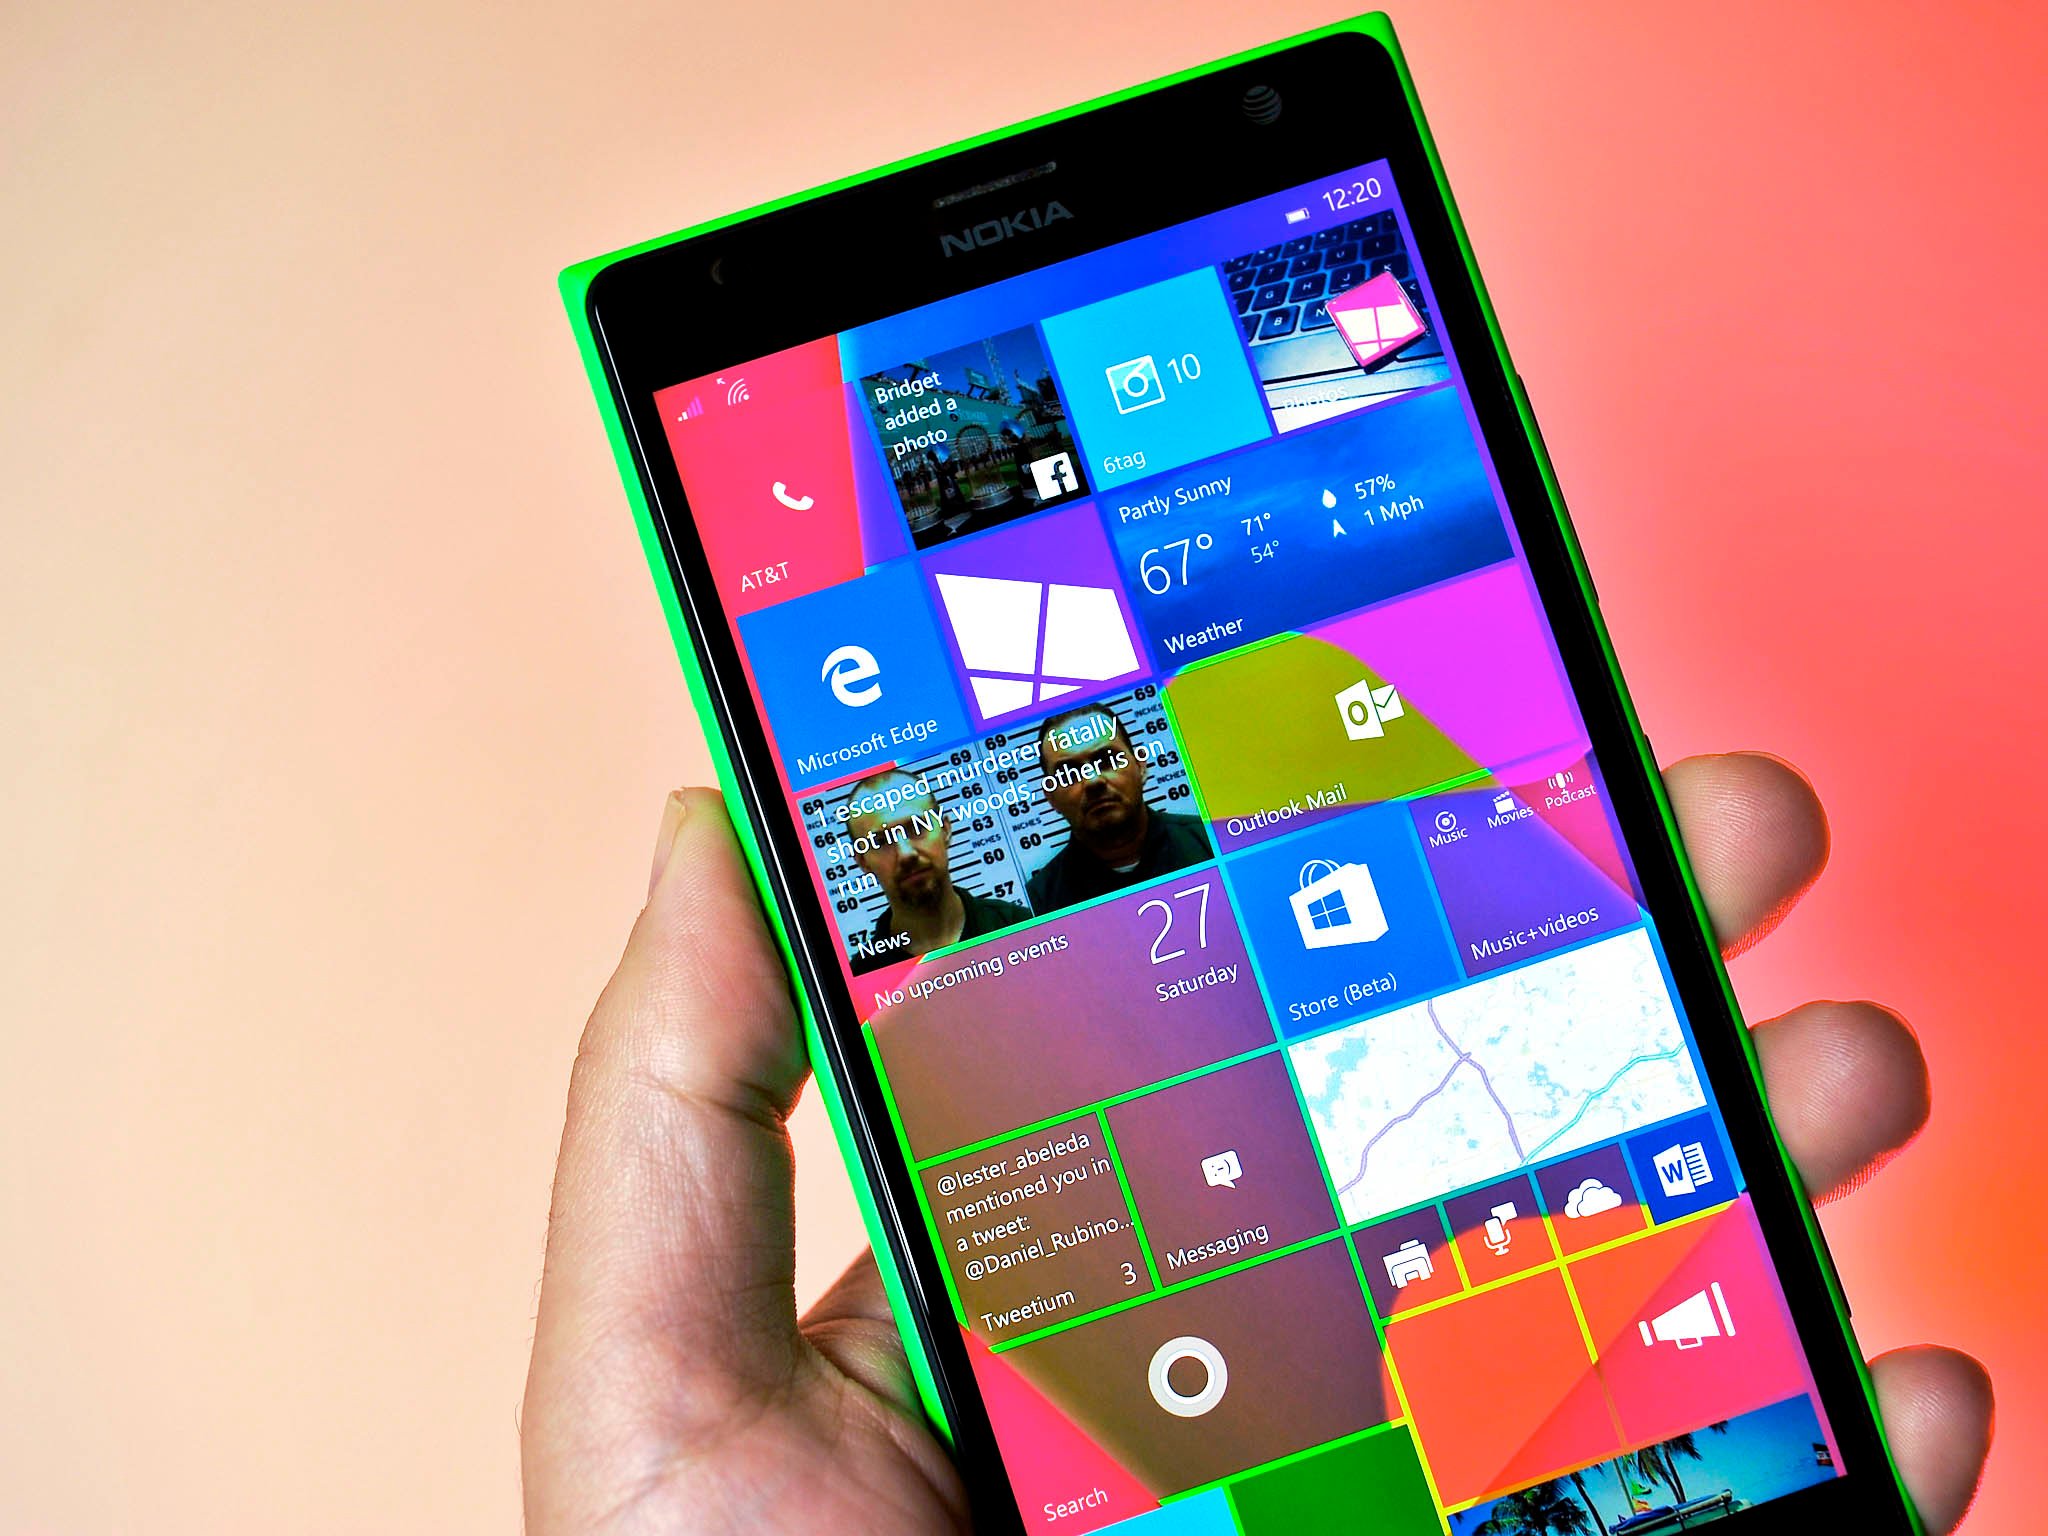 Leaked screenshots show off Windows 10 Mobile build 10162